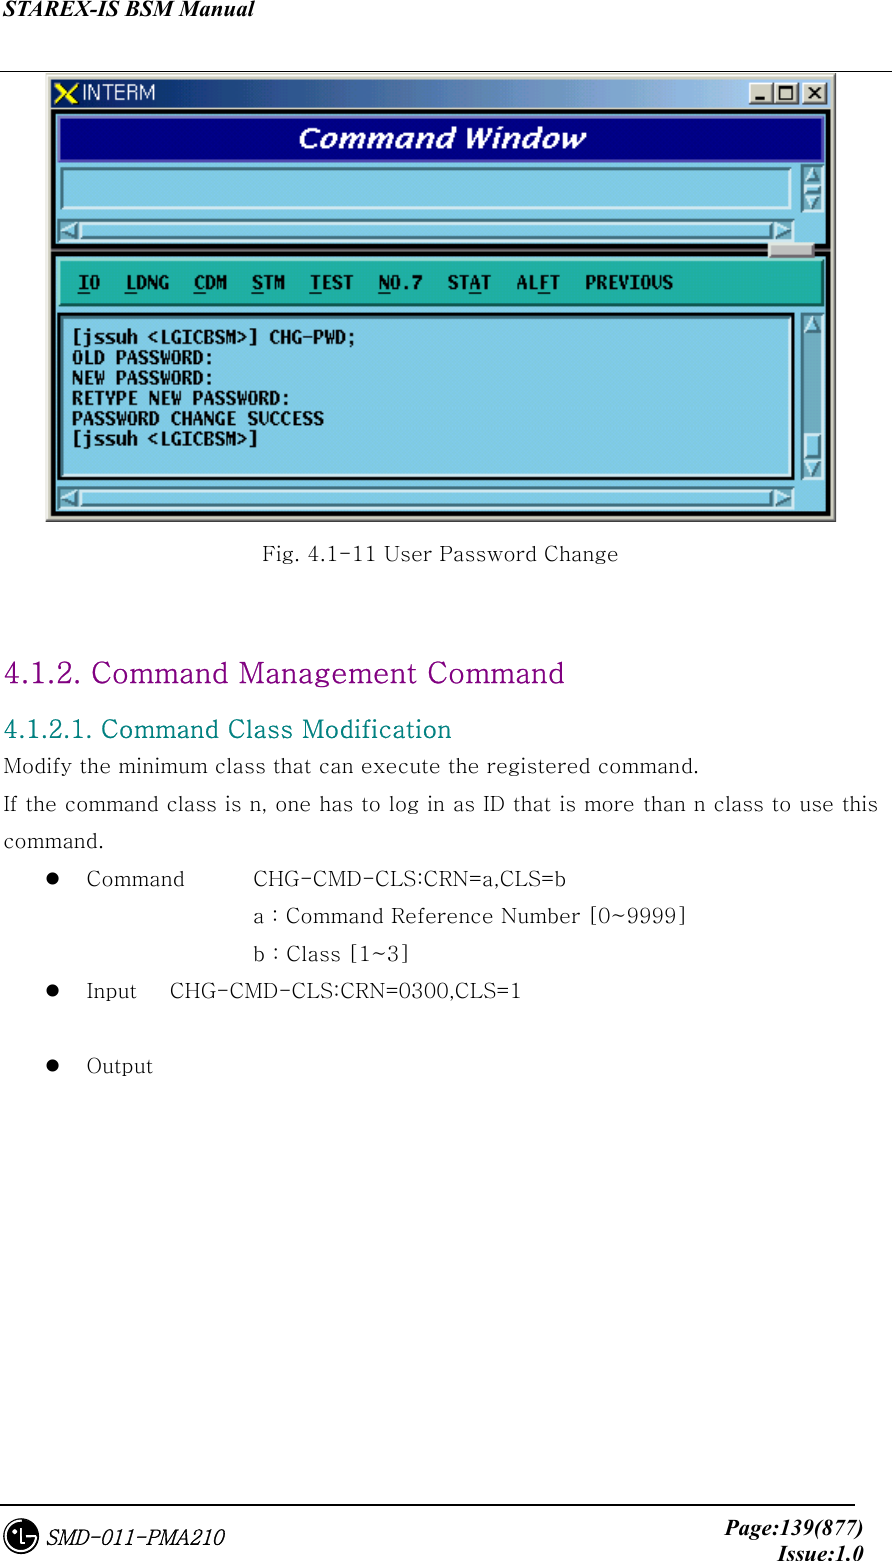 STAREX-IS BSM Manual     Page:139(877)Issue:1.0SMD-011-PMA210  Fig. 4.1-11 User Password Change  4.1.2. Command Management Command   4.1.2.1. Command Class Modification Modify the minimum class that can execute the registered command.   If the command class is n, one has to log in as ID that is more than n class to use this command.     Command  CHG-CMD-CLS:CRN=a,CLS=b          a : Command Reference Number [0~9999]       b : Class [1~3]   Input  CHG-CMD-CLS:CRN=0300,CLS=1    Output  